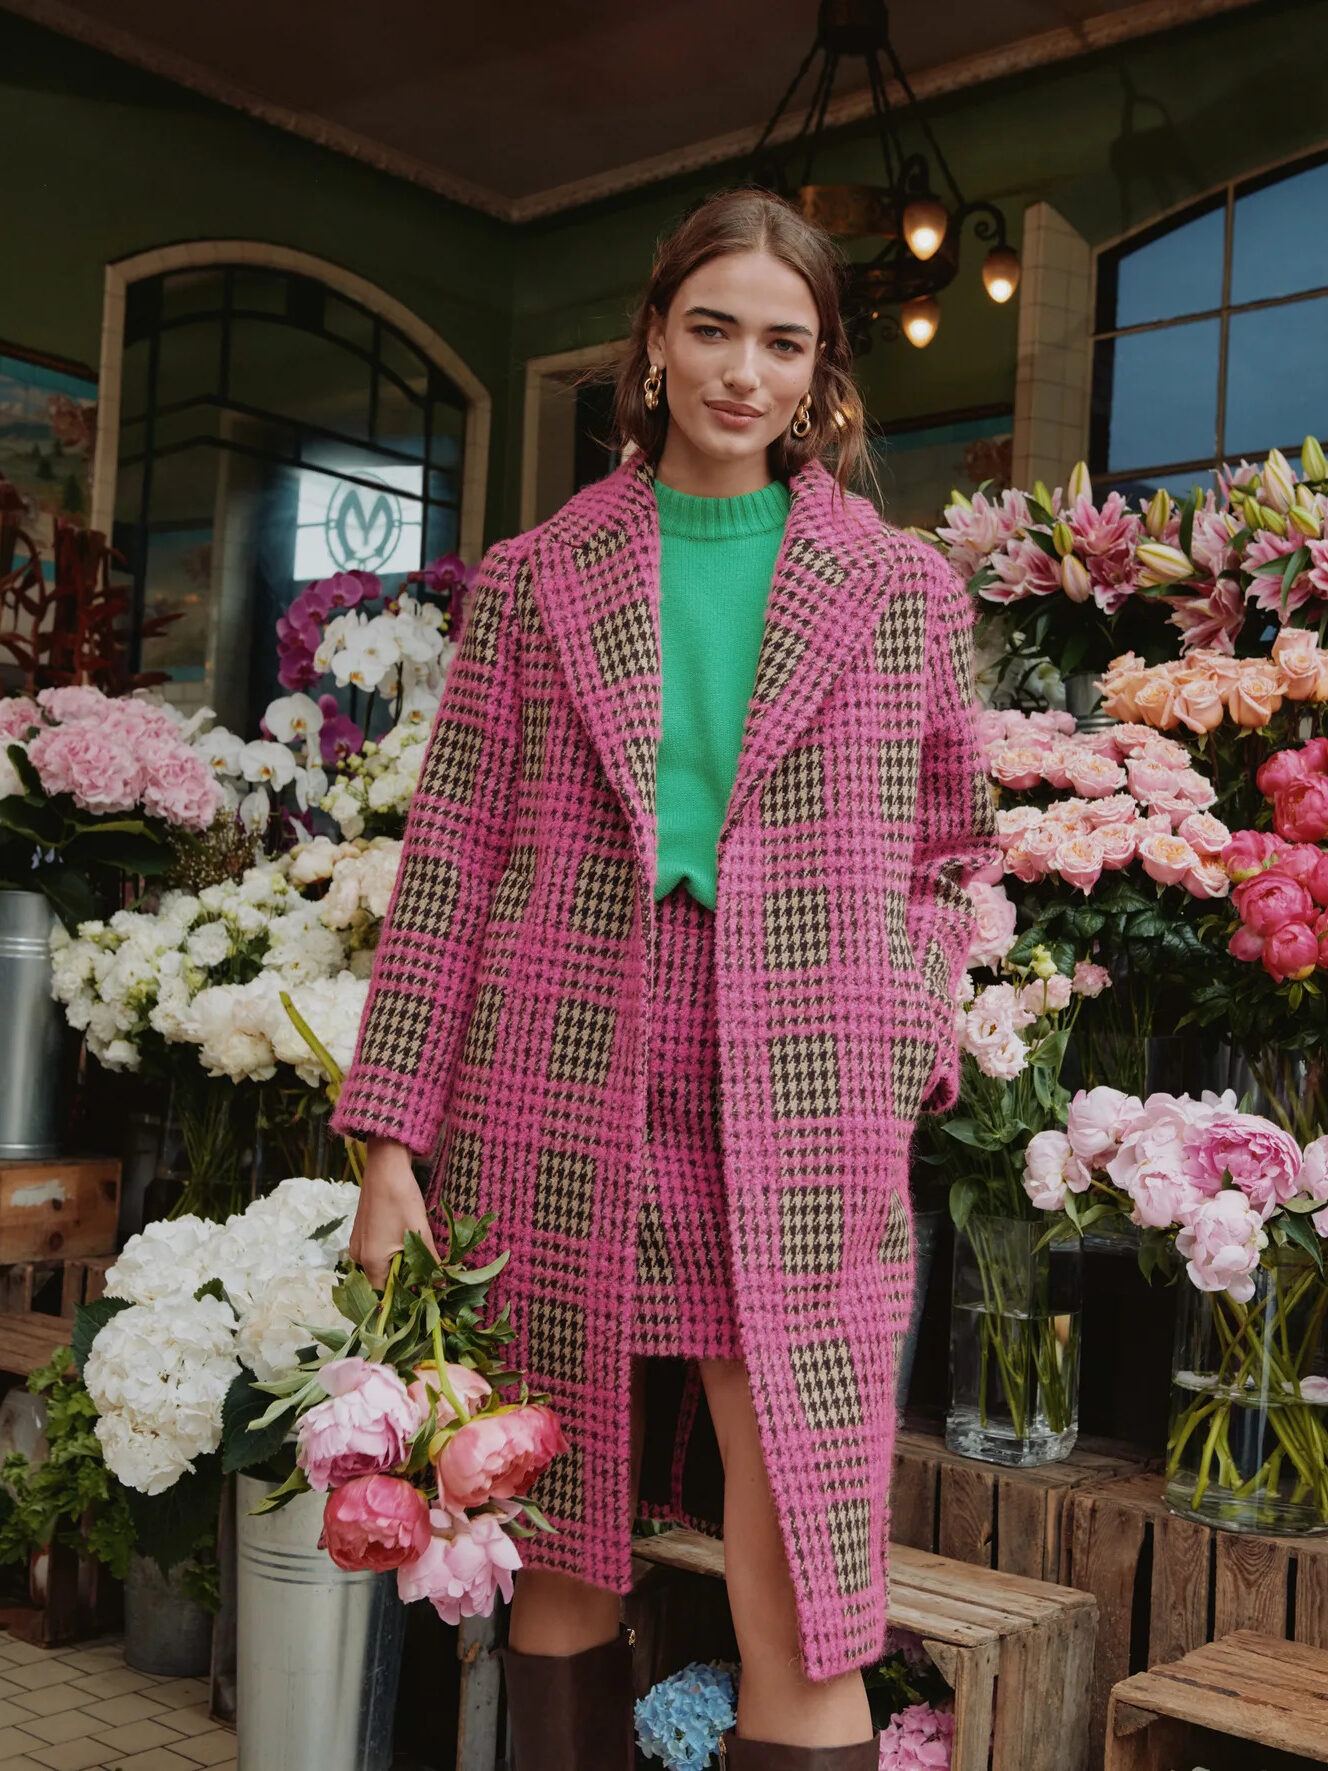 A model wearing a pink and green houndstooth patterned mid-length pea coat by Boden. 